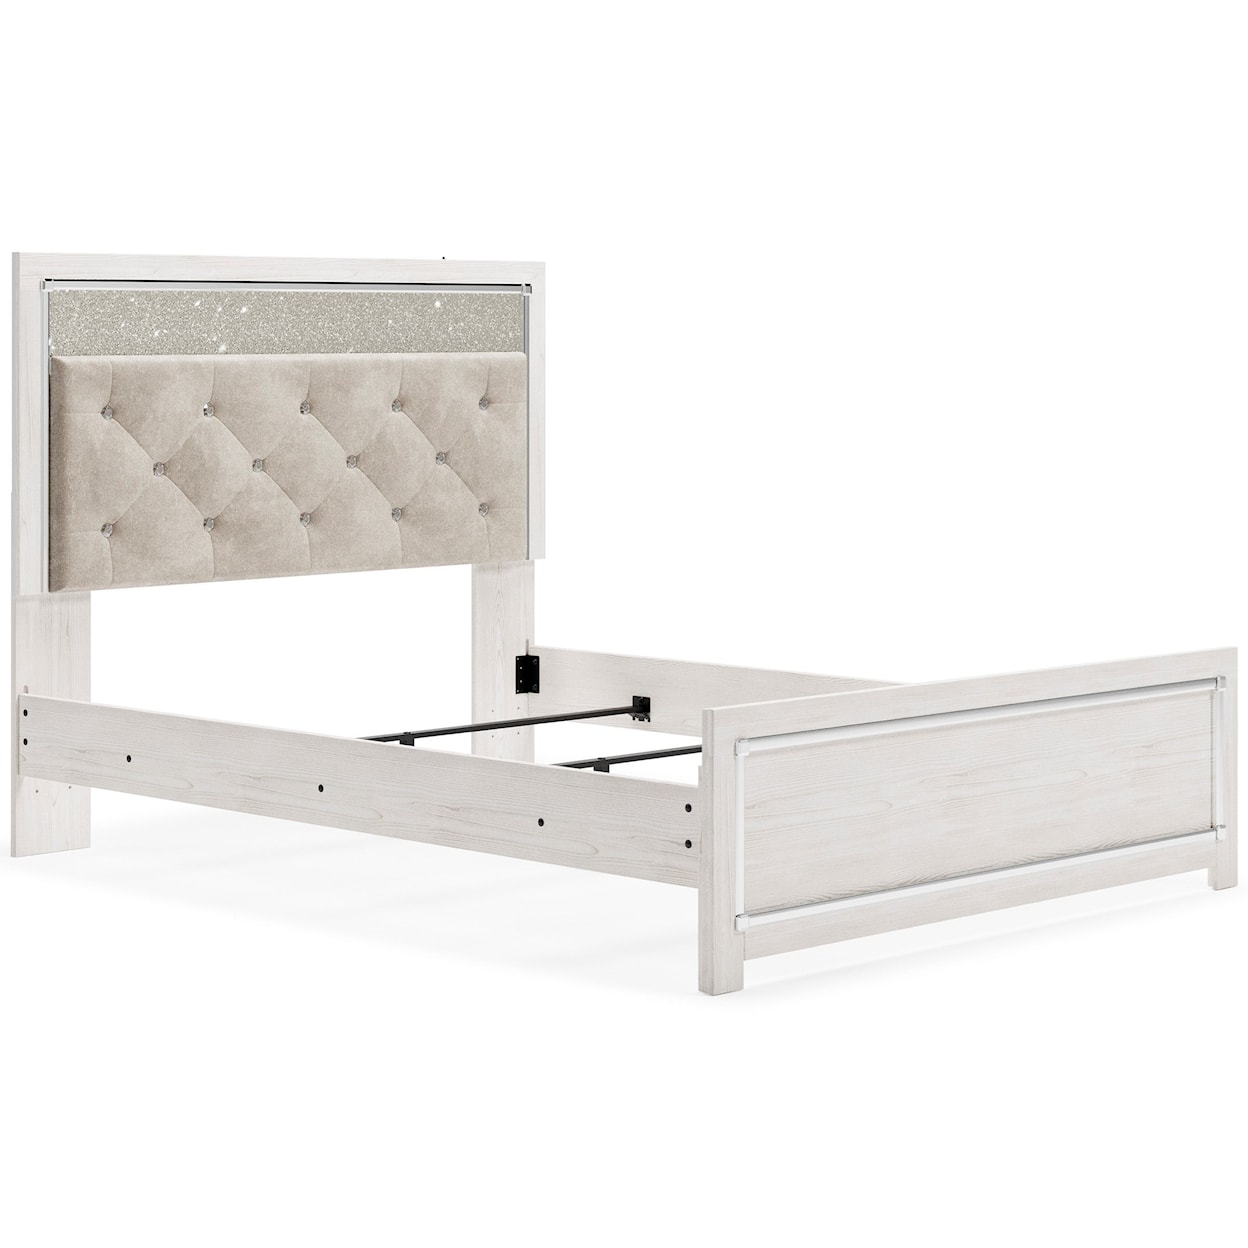 Signature Altyra Queen Upholstered Panel Bed